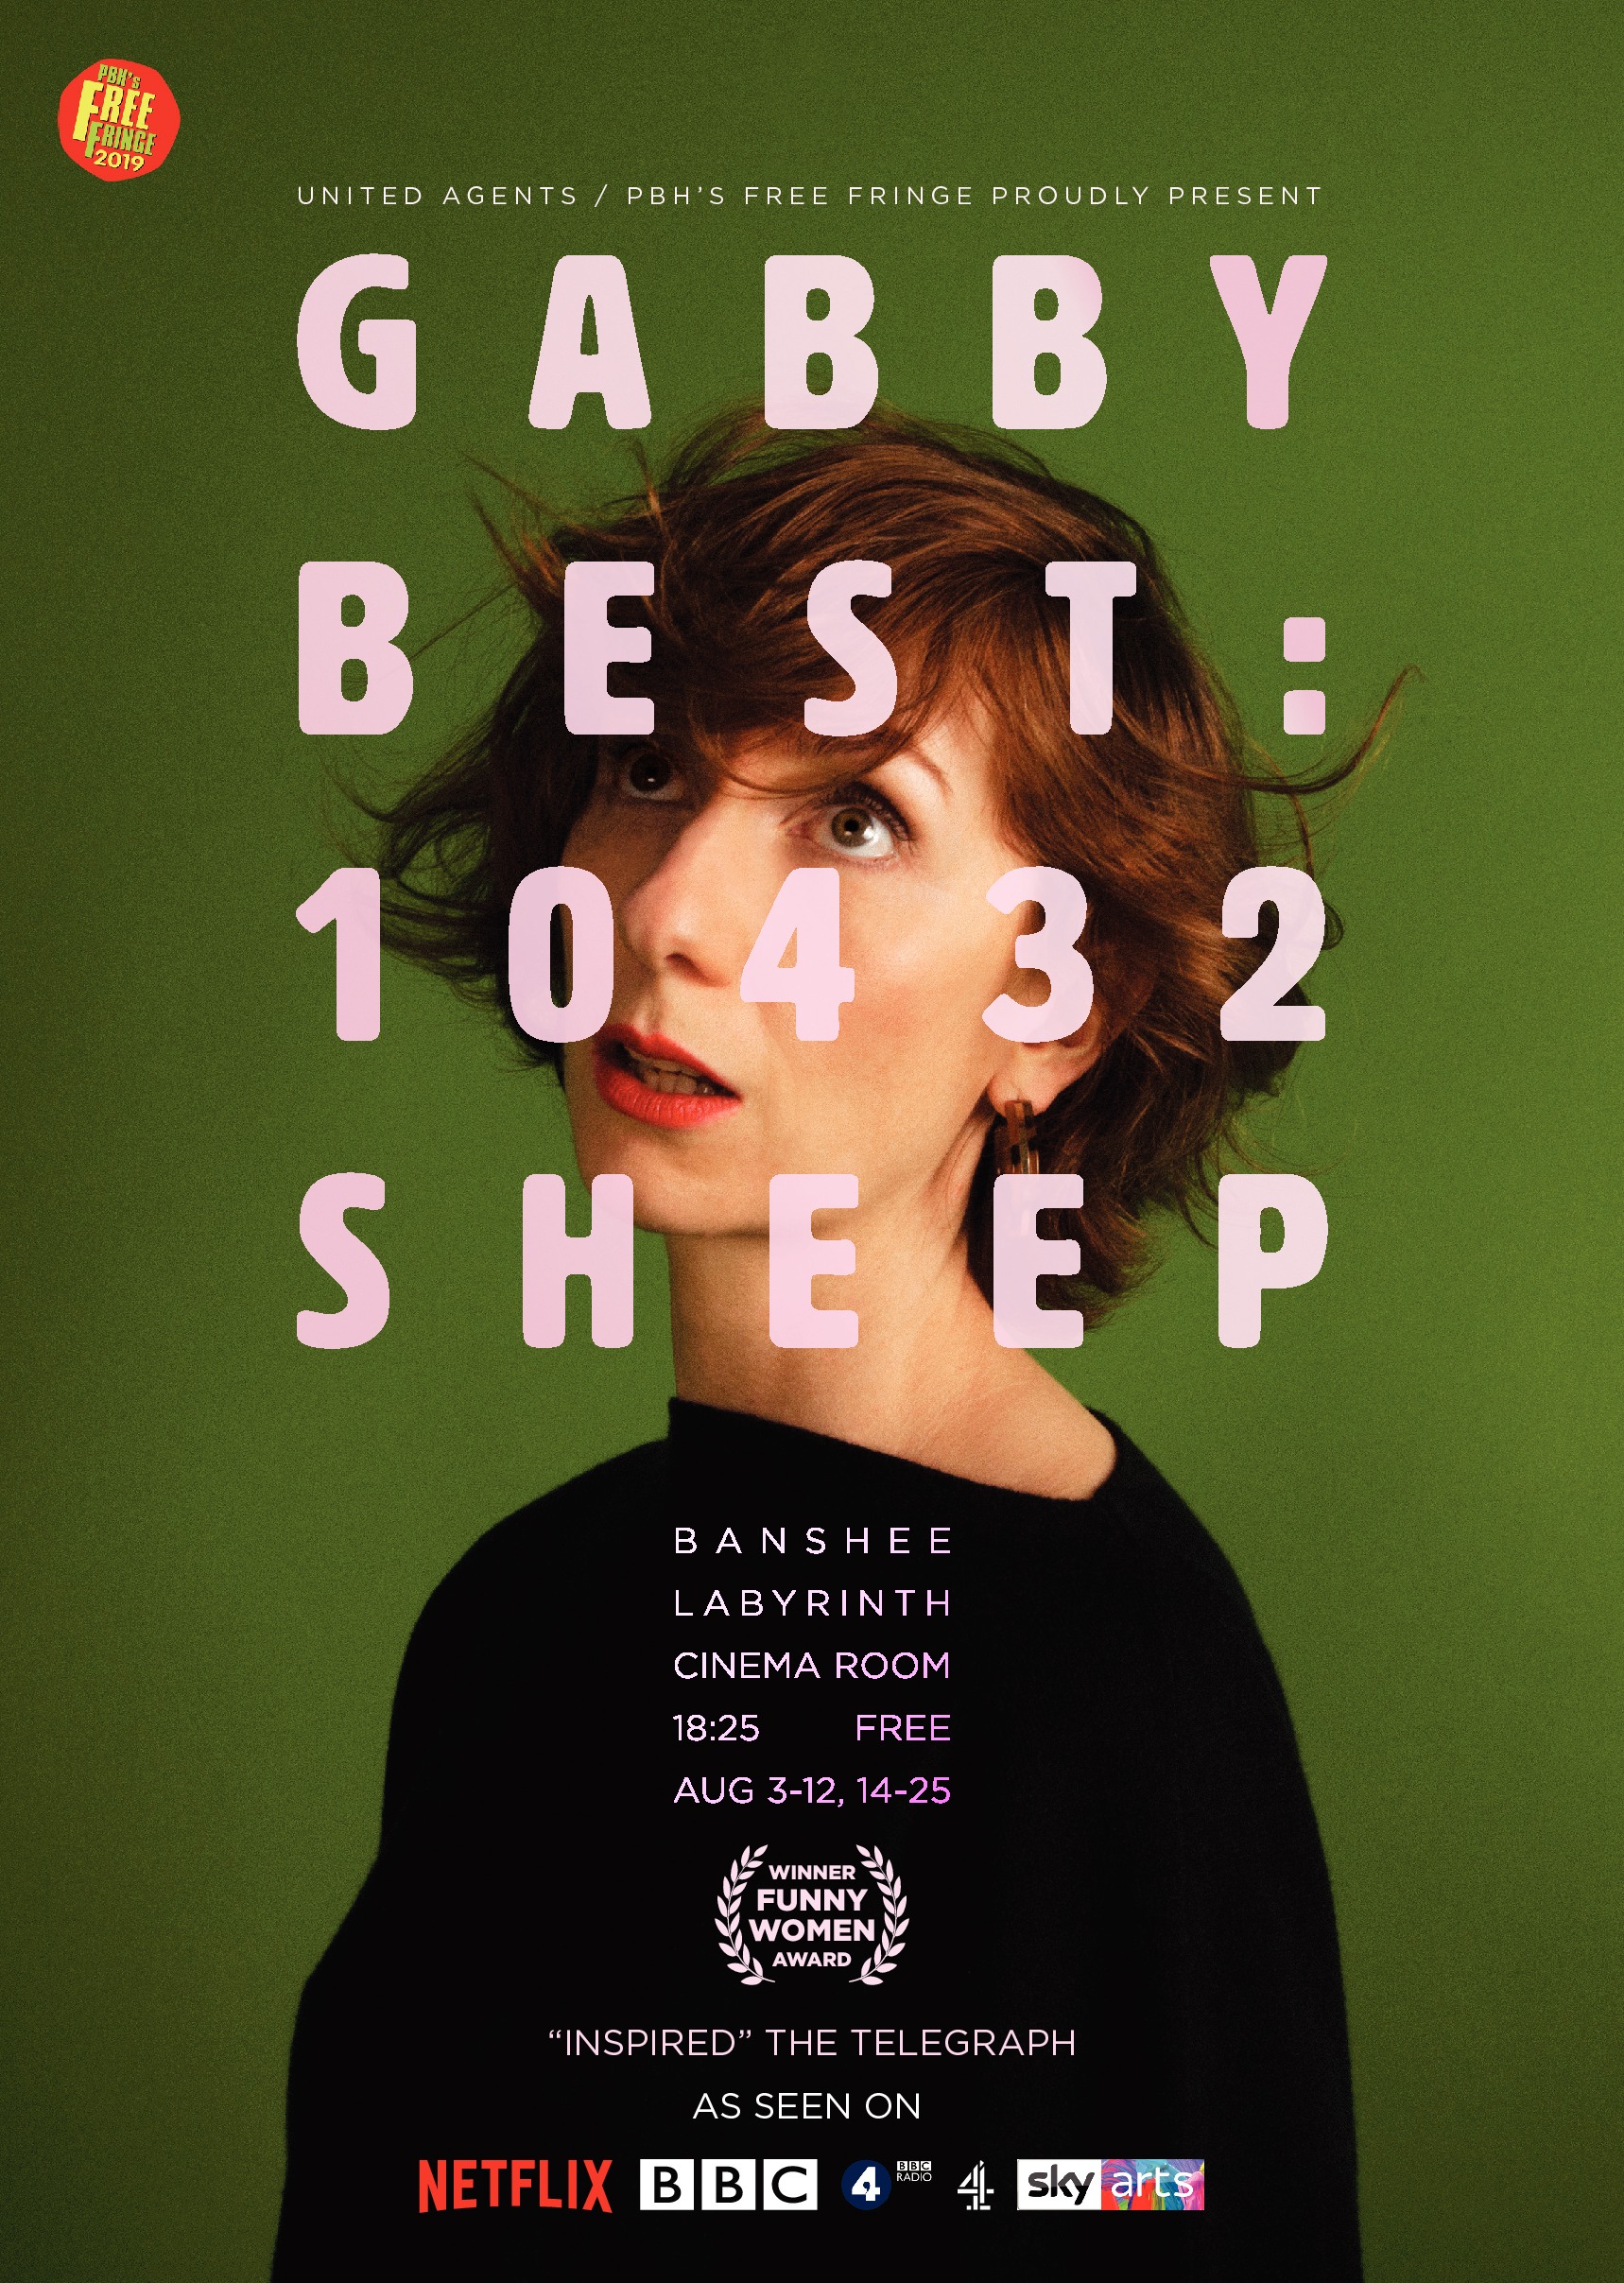 The poster for Gabby Best: 10,432 Sheep